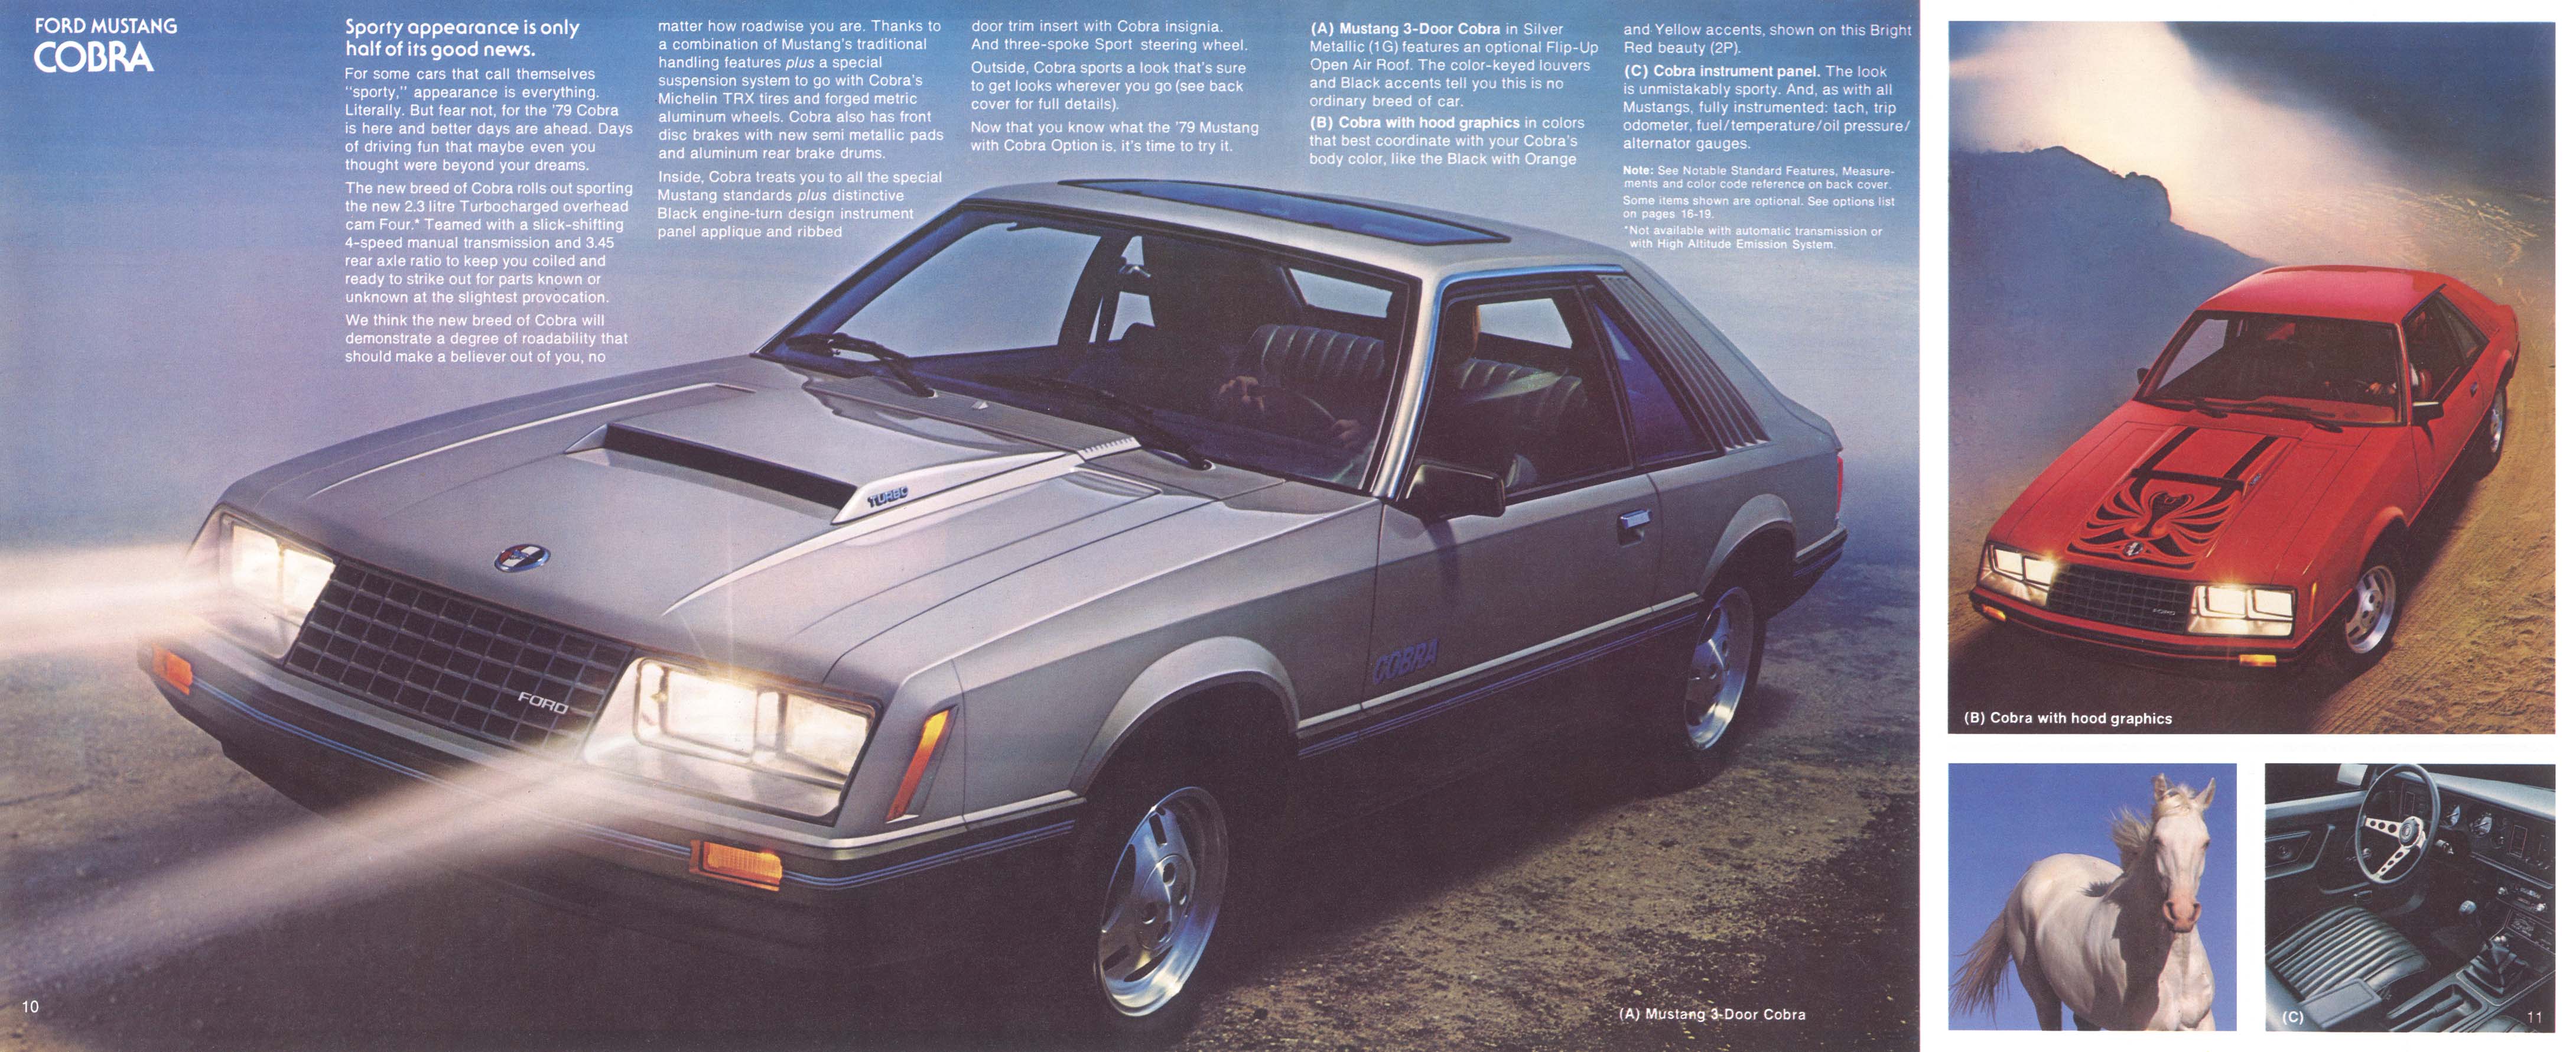 1979_Ford_Mustang-10-11